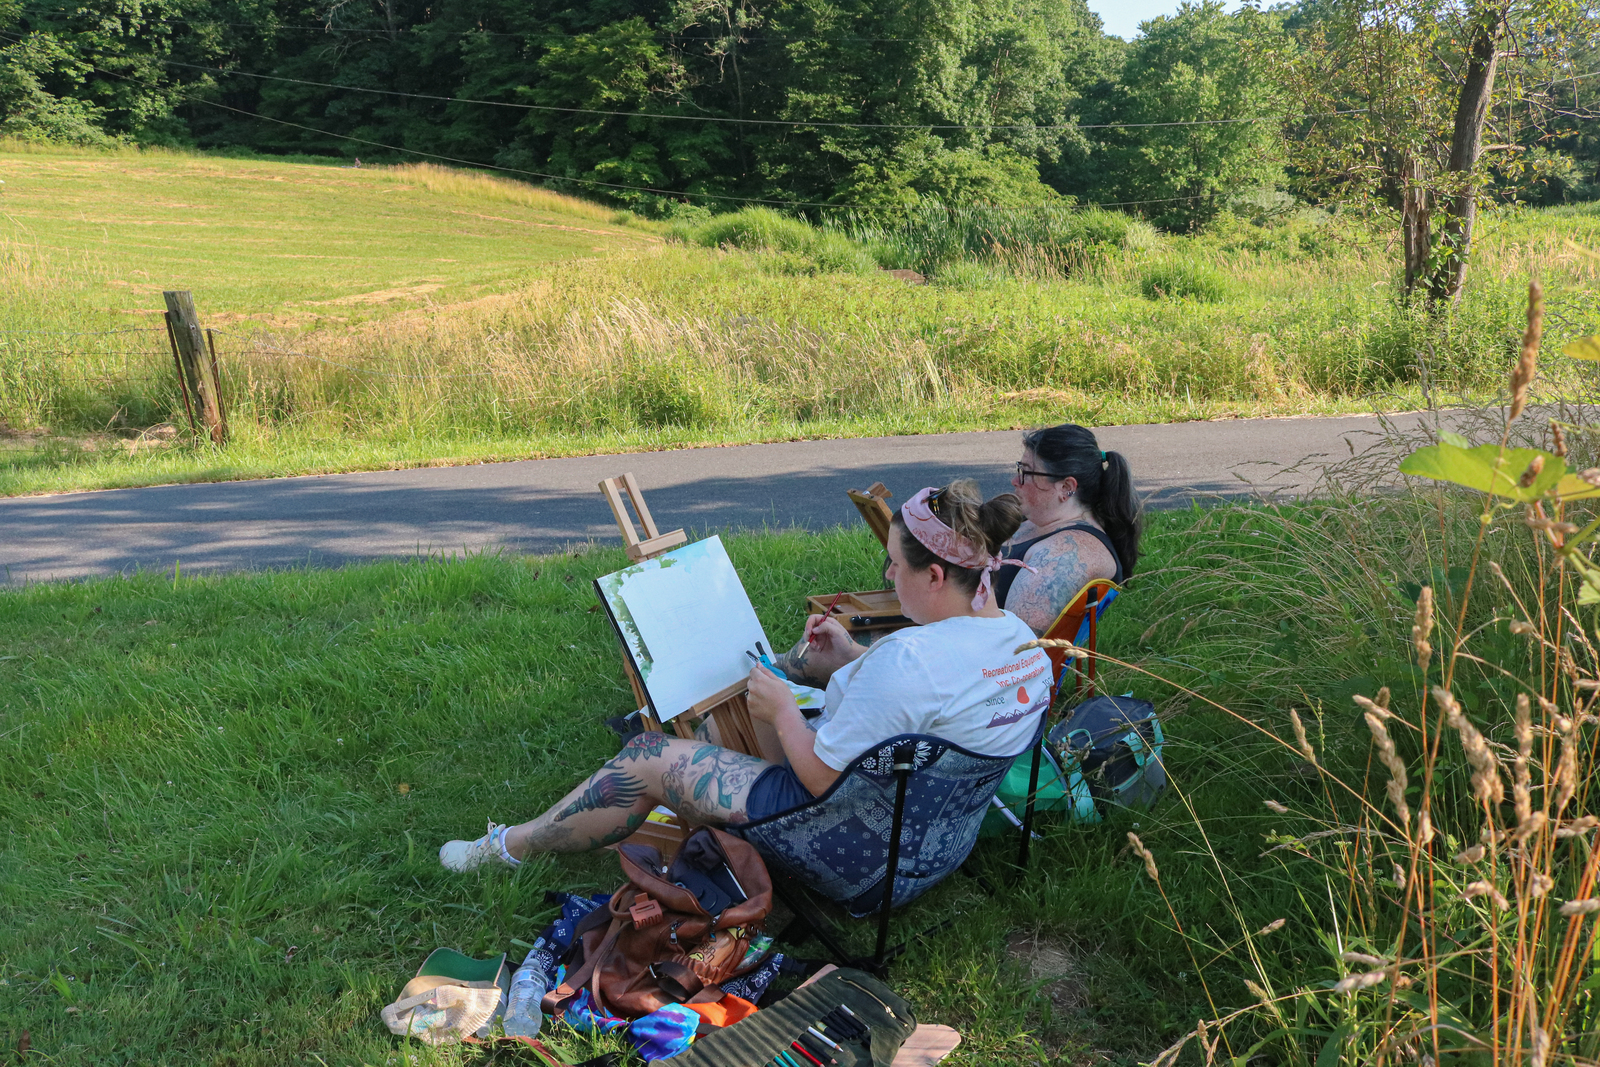 Two women sitting on lawn chairs paint on canvas in an open field.